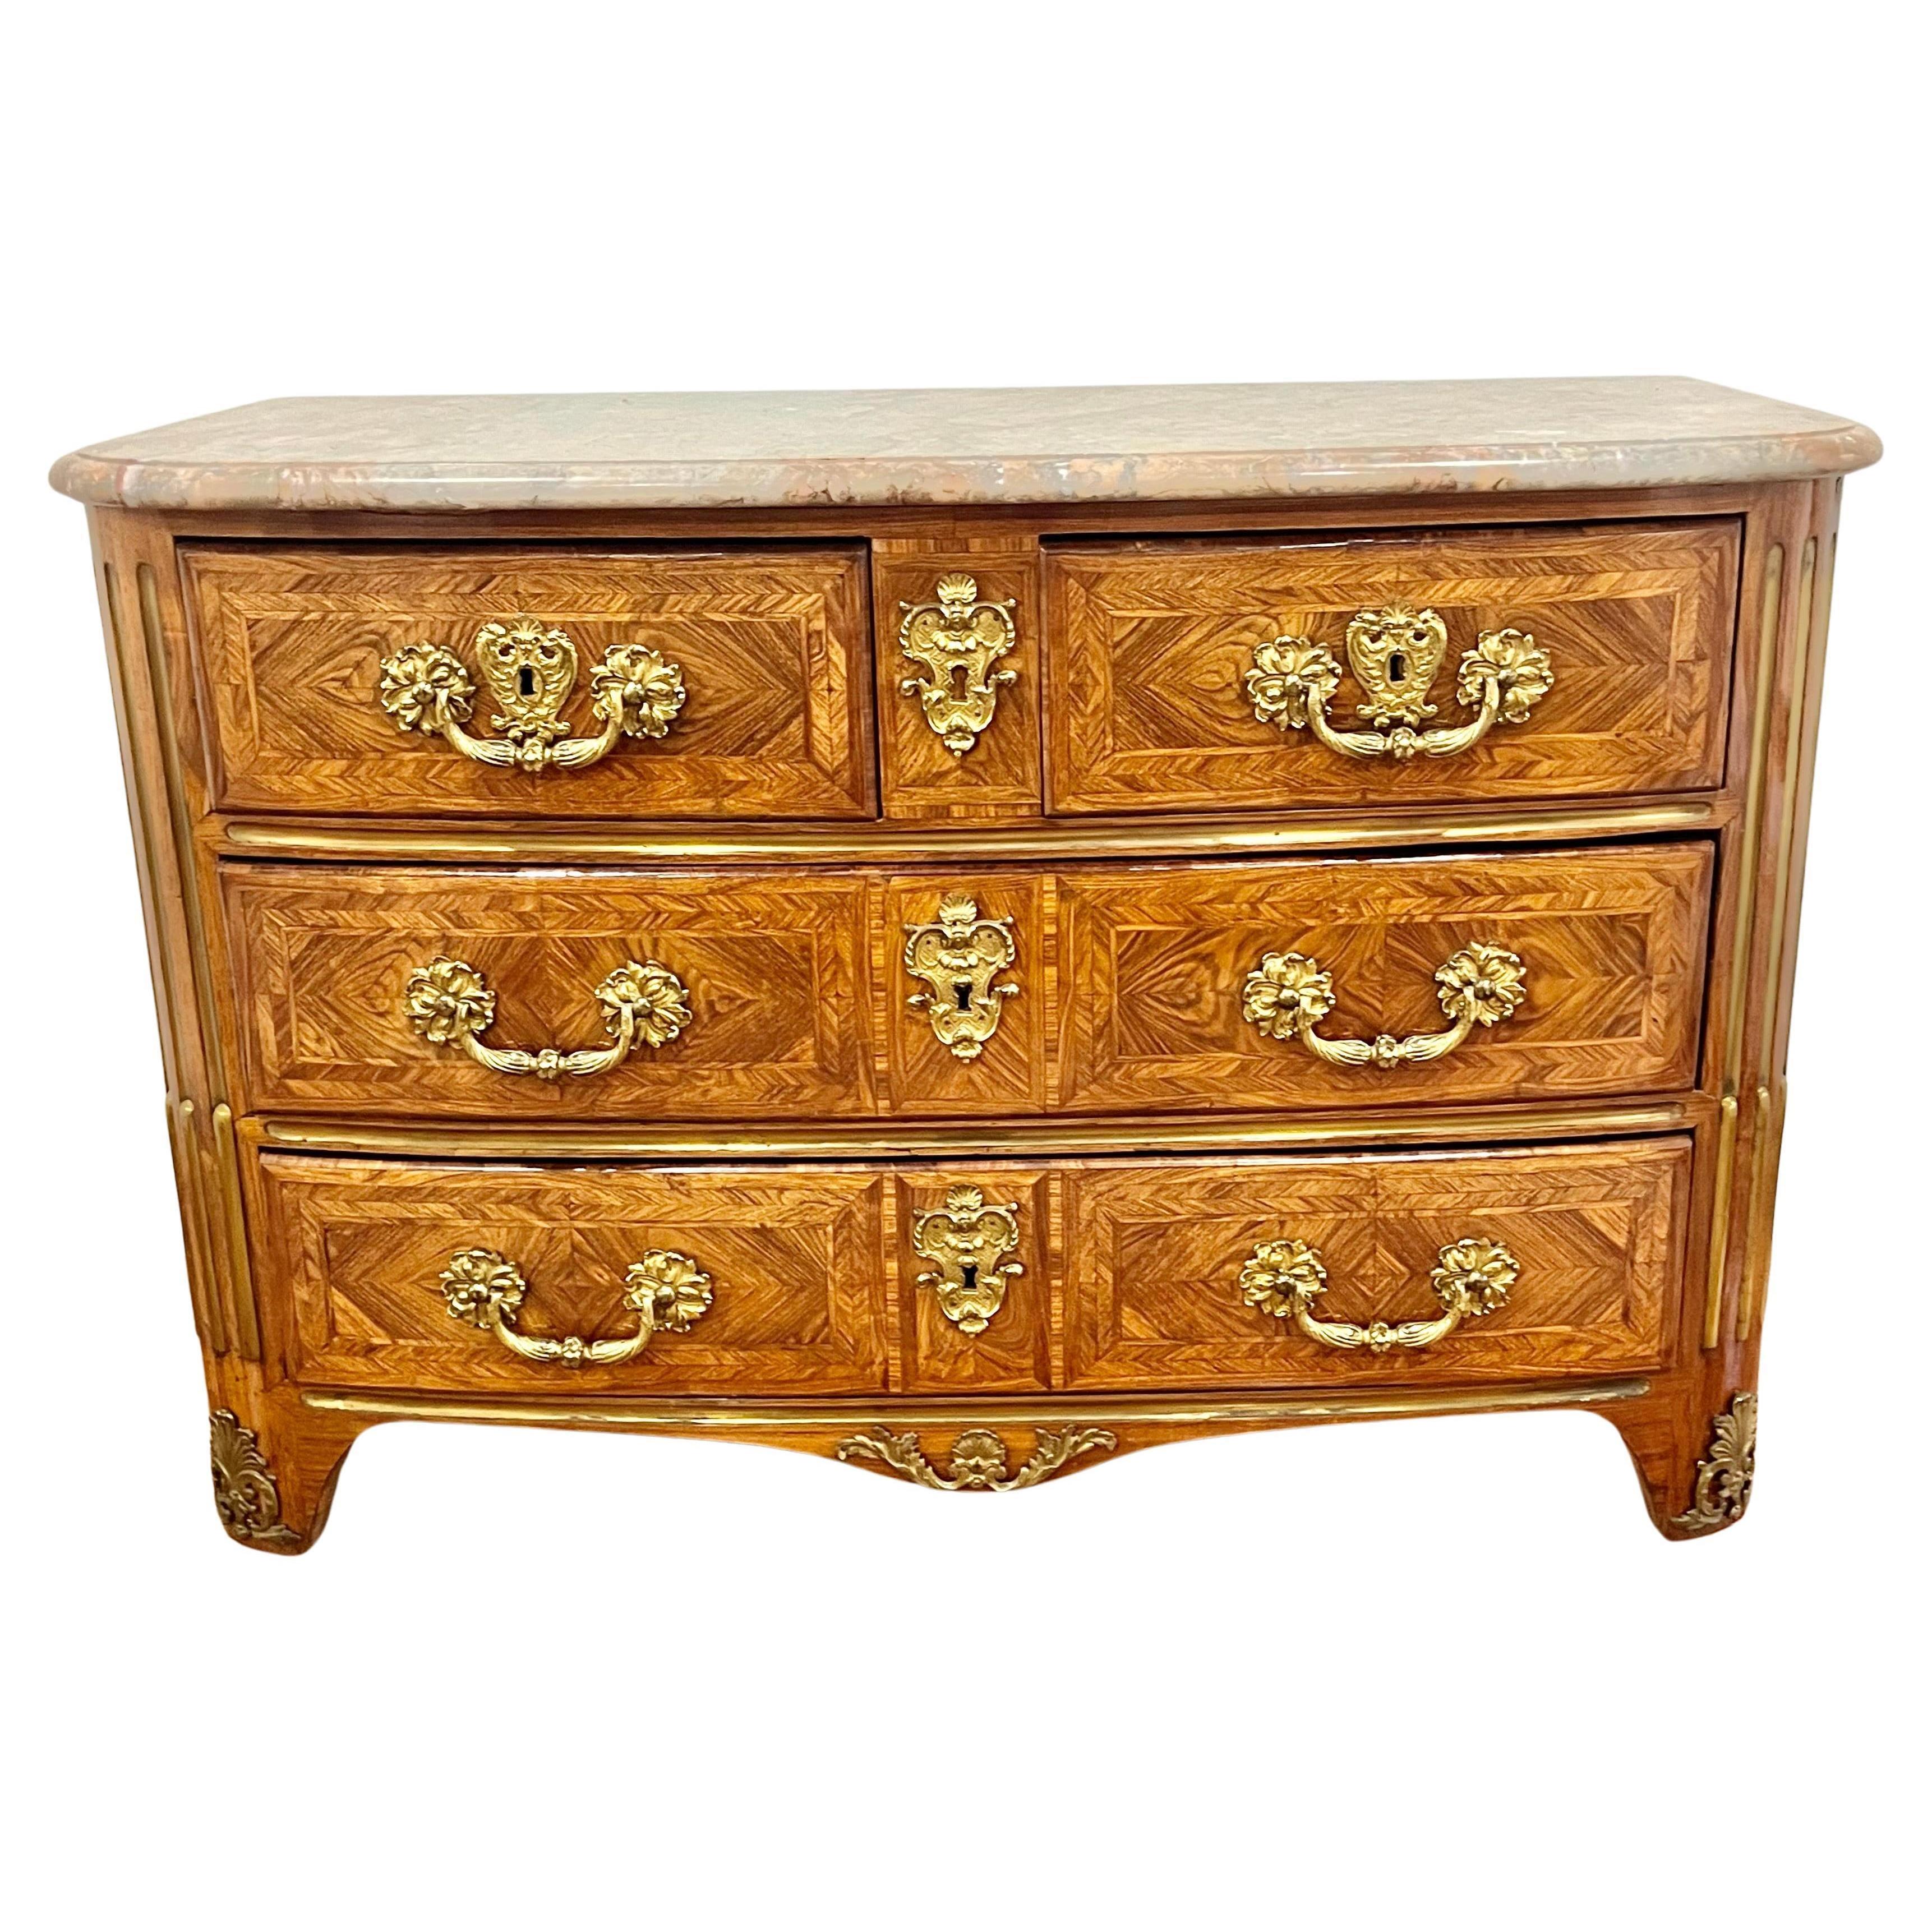 Primarily of tulipwood and kingwood with heavy gilded drawer mounts  . Sturdy . Presents very well . The drawers reflecting the fabled tulip by the gilt rosettes. The veneers laid in flattering patterns crossbanded and with tulips.  The sides with